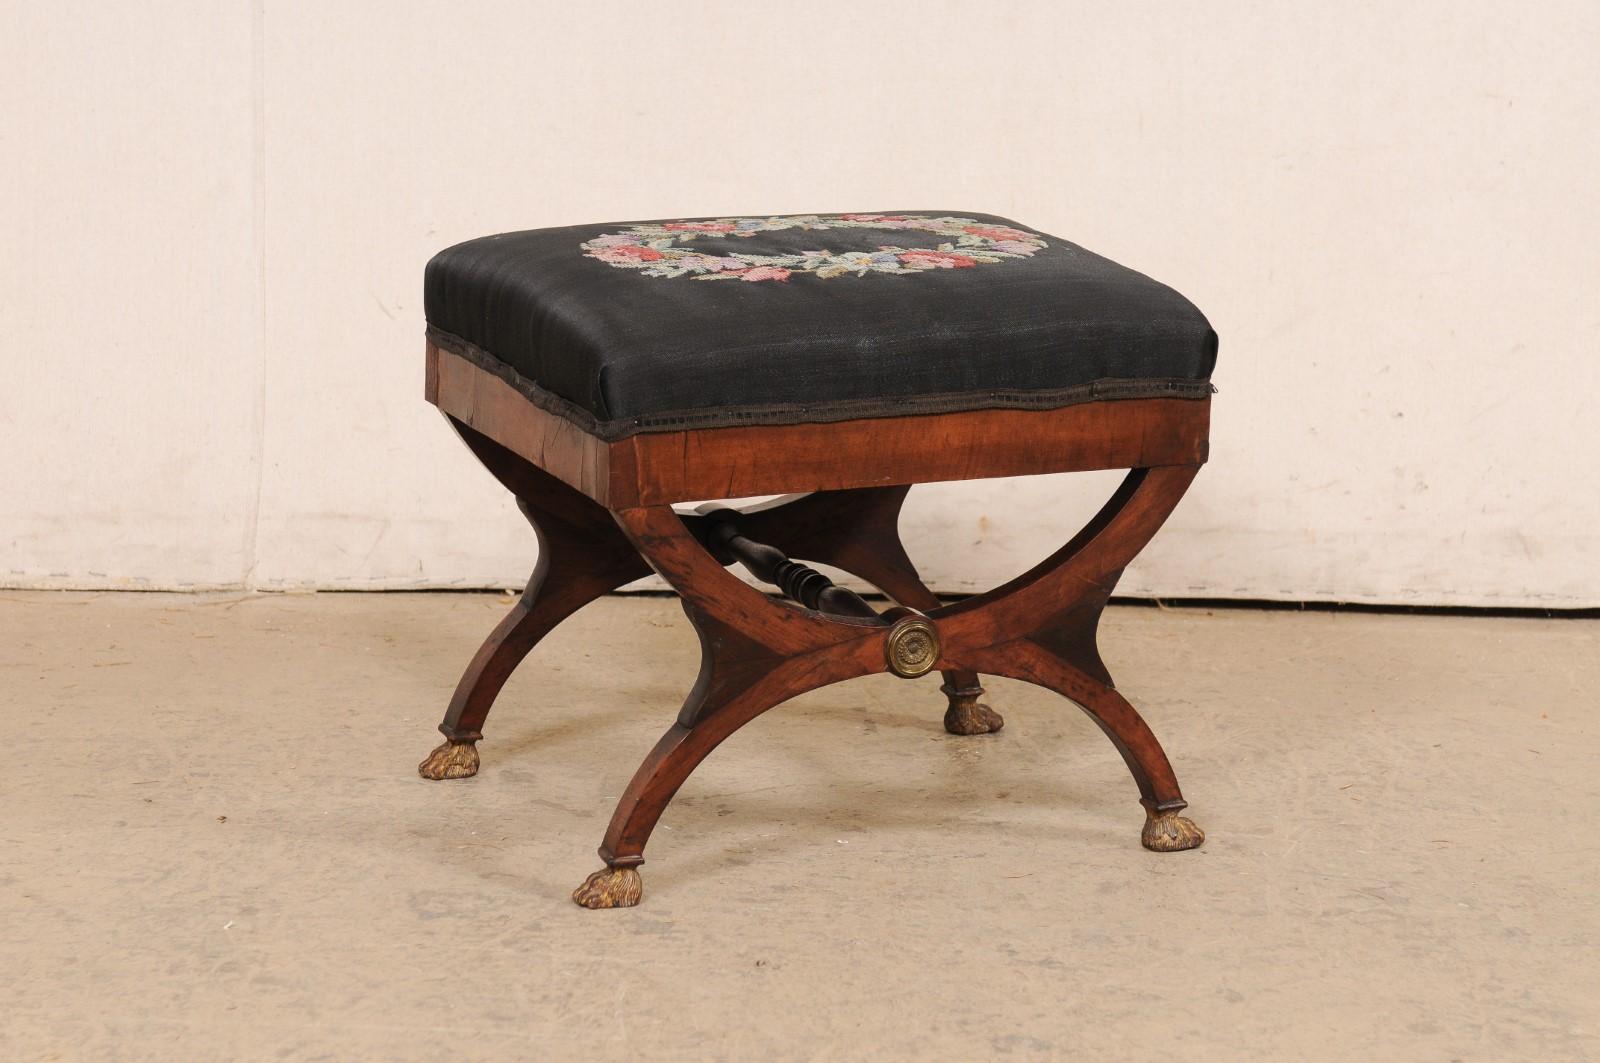 An Italian carved wood dante stool with upholstered seat from the early 19th century. This small bench from Italy, circa 1820's, has been designed in the typical dante style with legs consisting of two half-moon shapes, which attach at their rounded